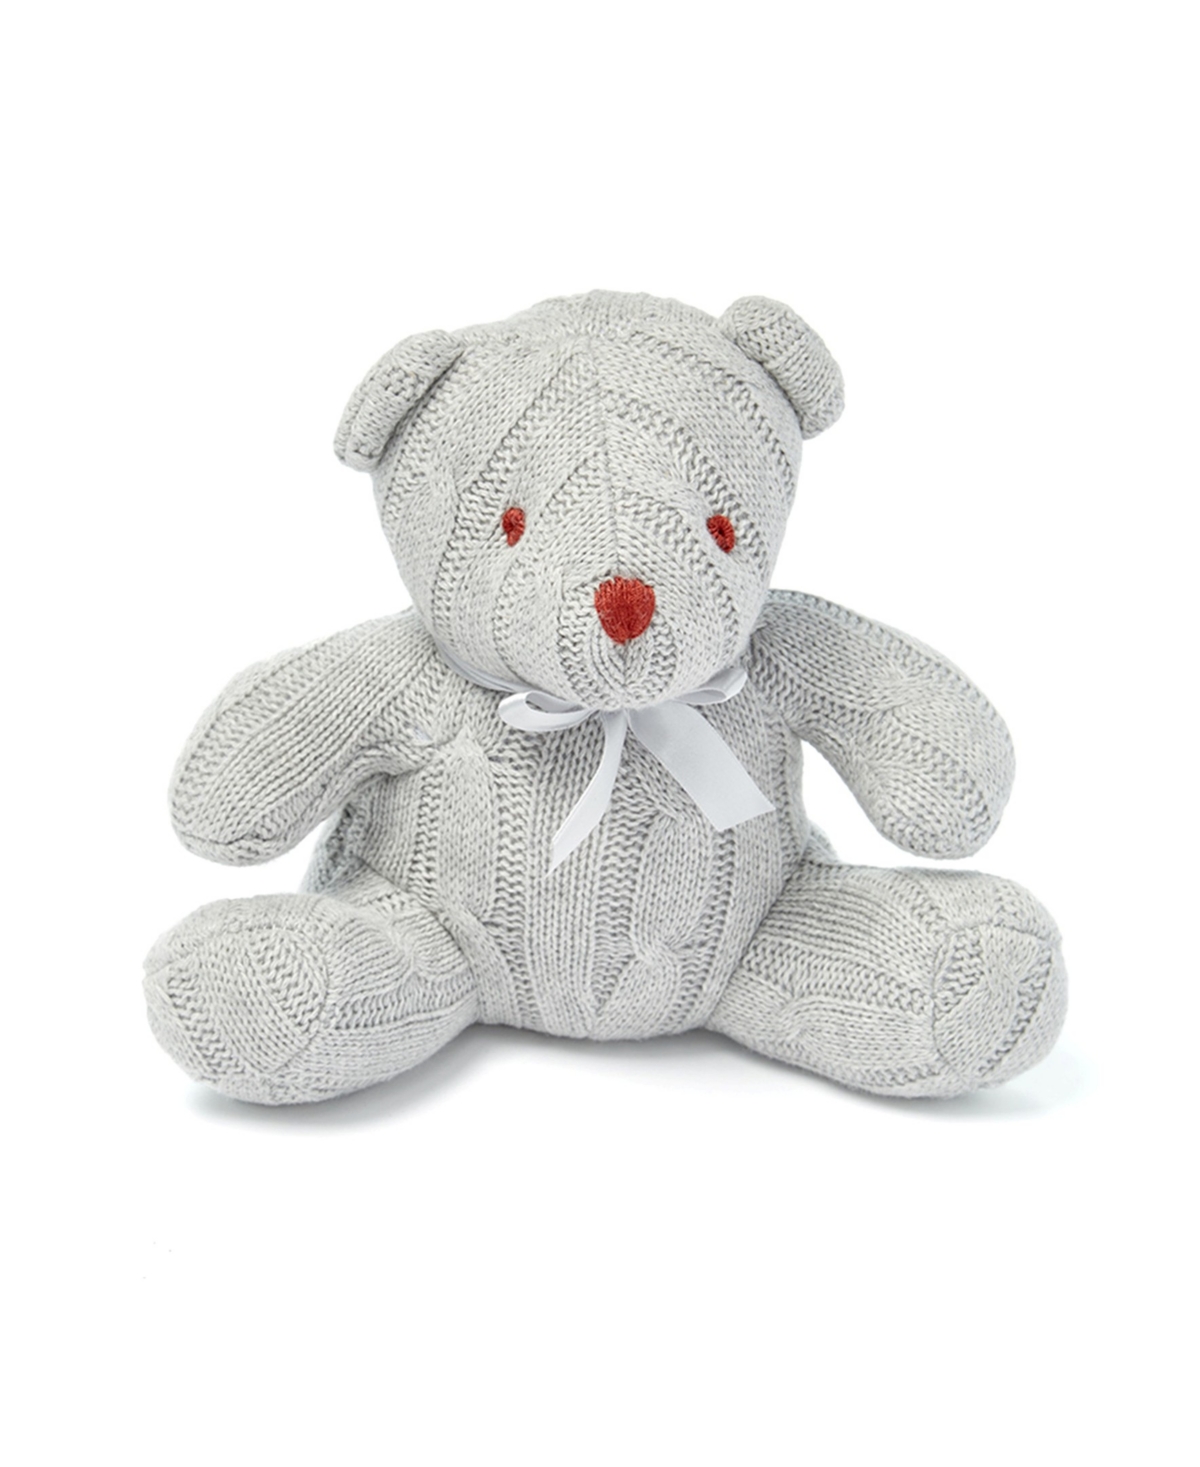 3 Stories Trading Baby Boys Or Baby Girls Cable Knit Snuggle Bear In Gray